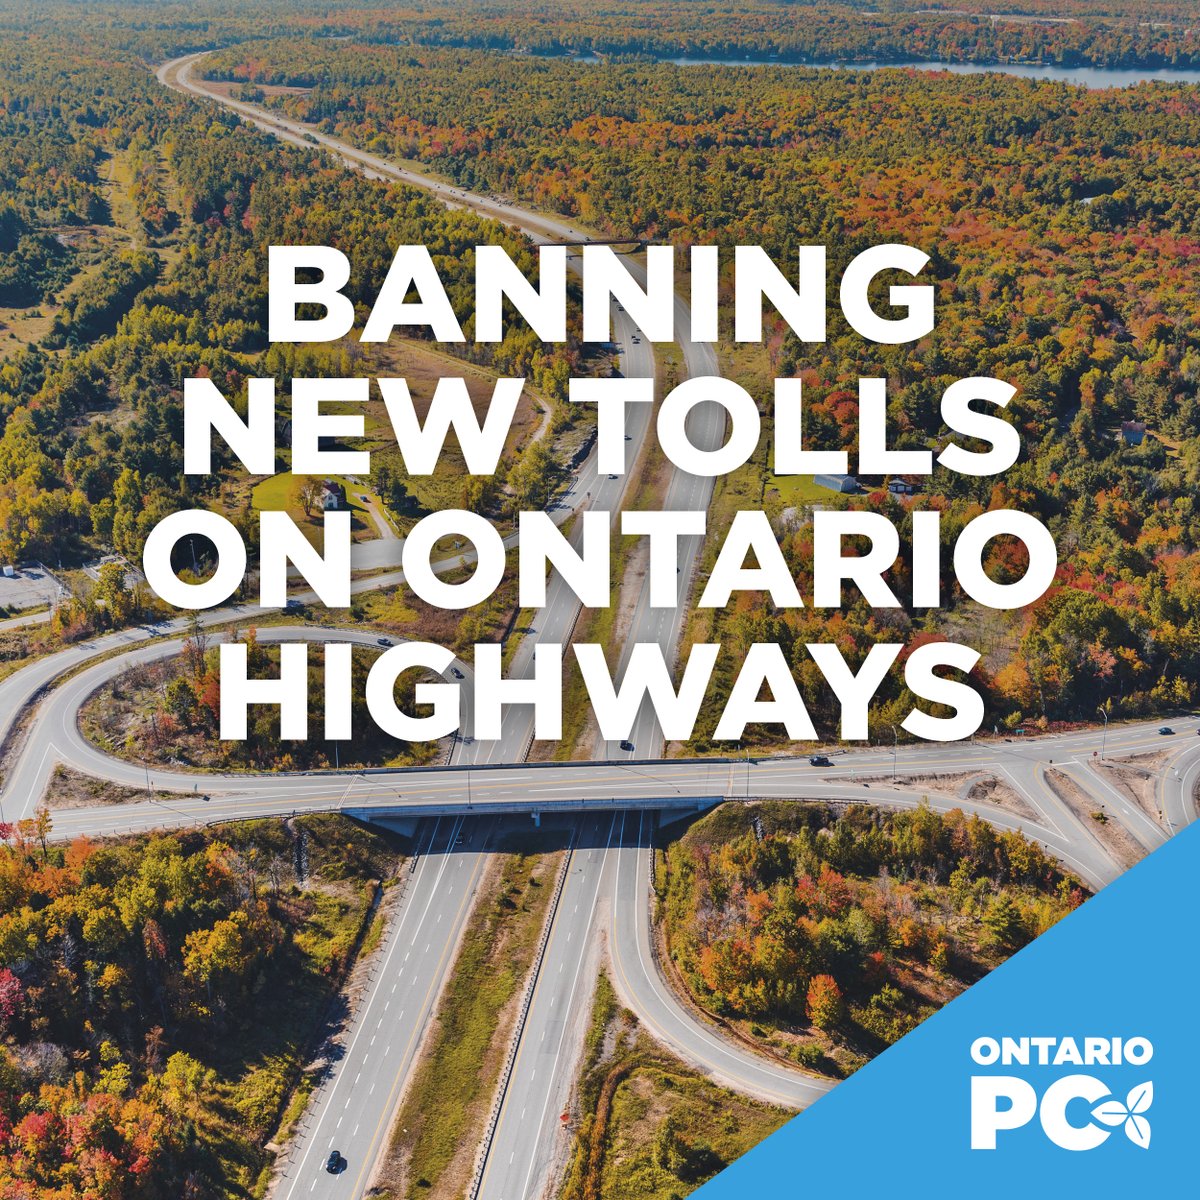 While Bonnie Crombie and her Liberal pals block new highways and force drivers to wait in traffic, our PC team is supporting drivers by: ✔ Banning new tolls on all Ontario highways ✔ Freezing driver's licence fees ✔ Building Highway 413 and the Bradford Bypass